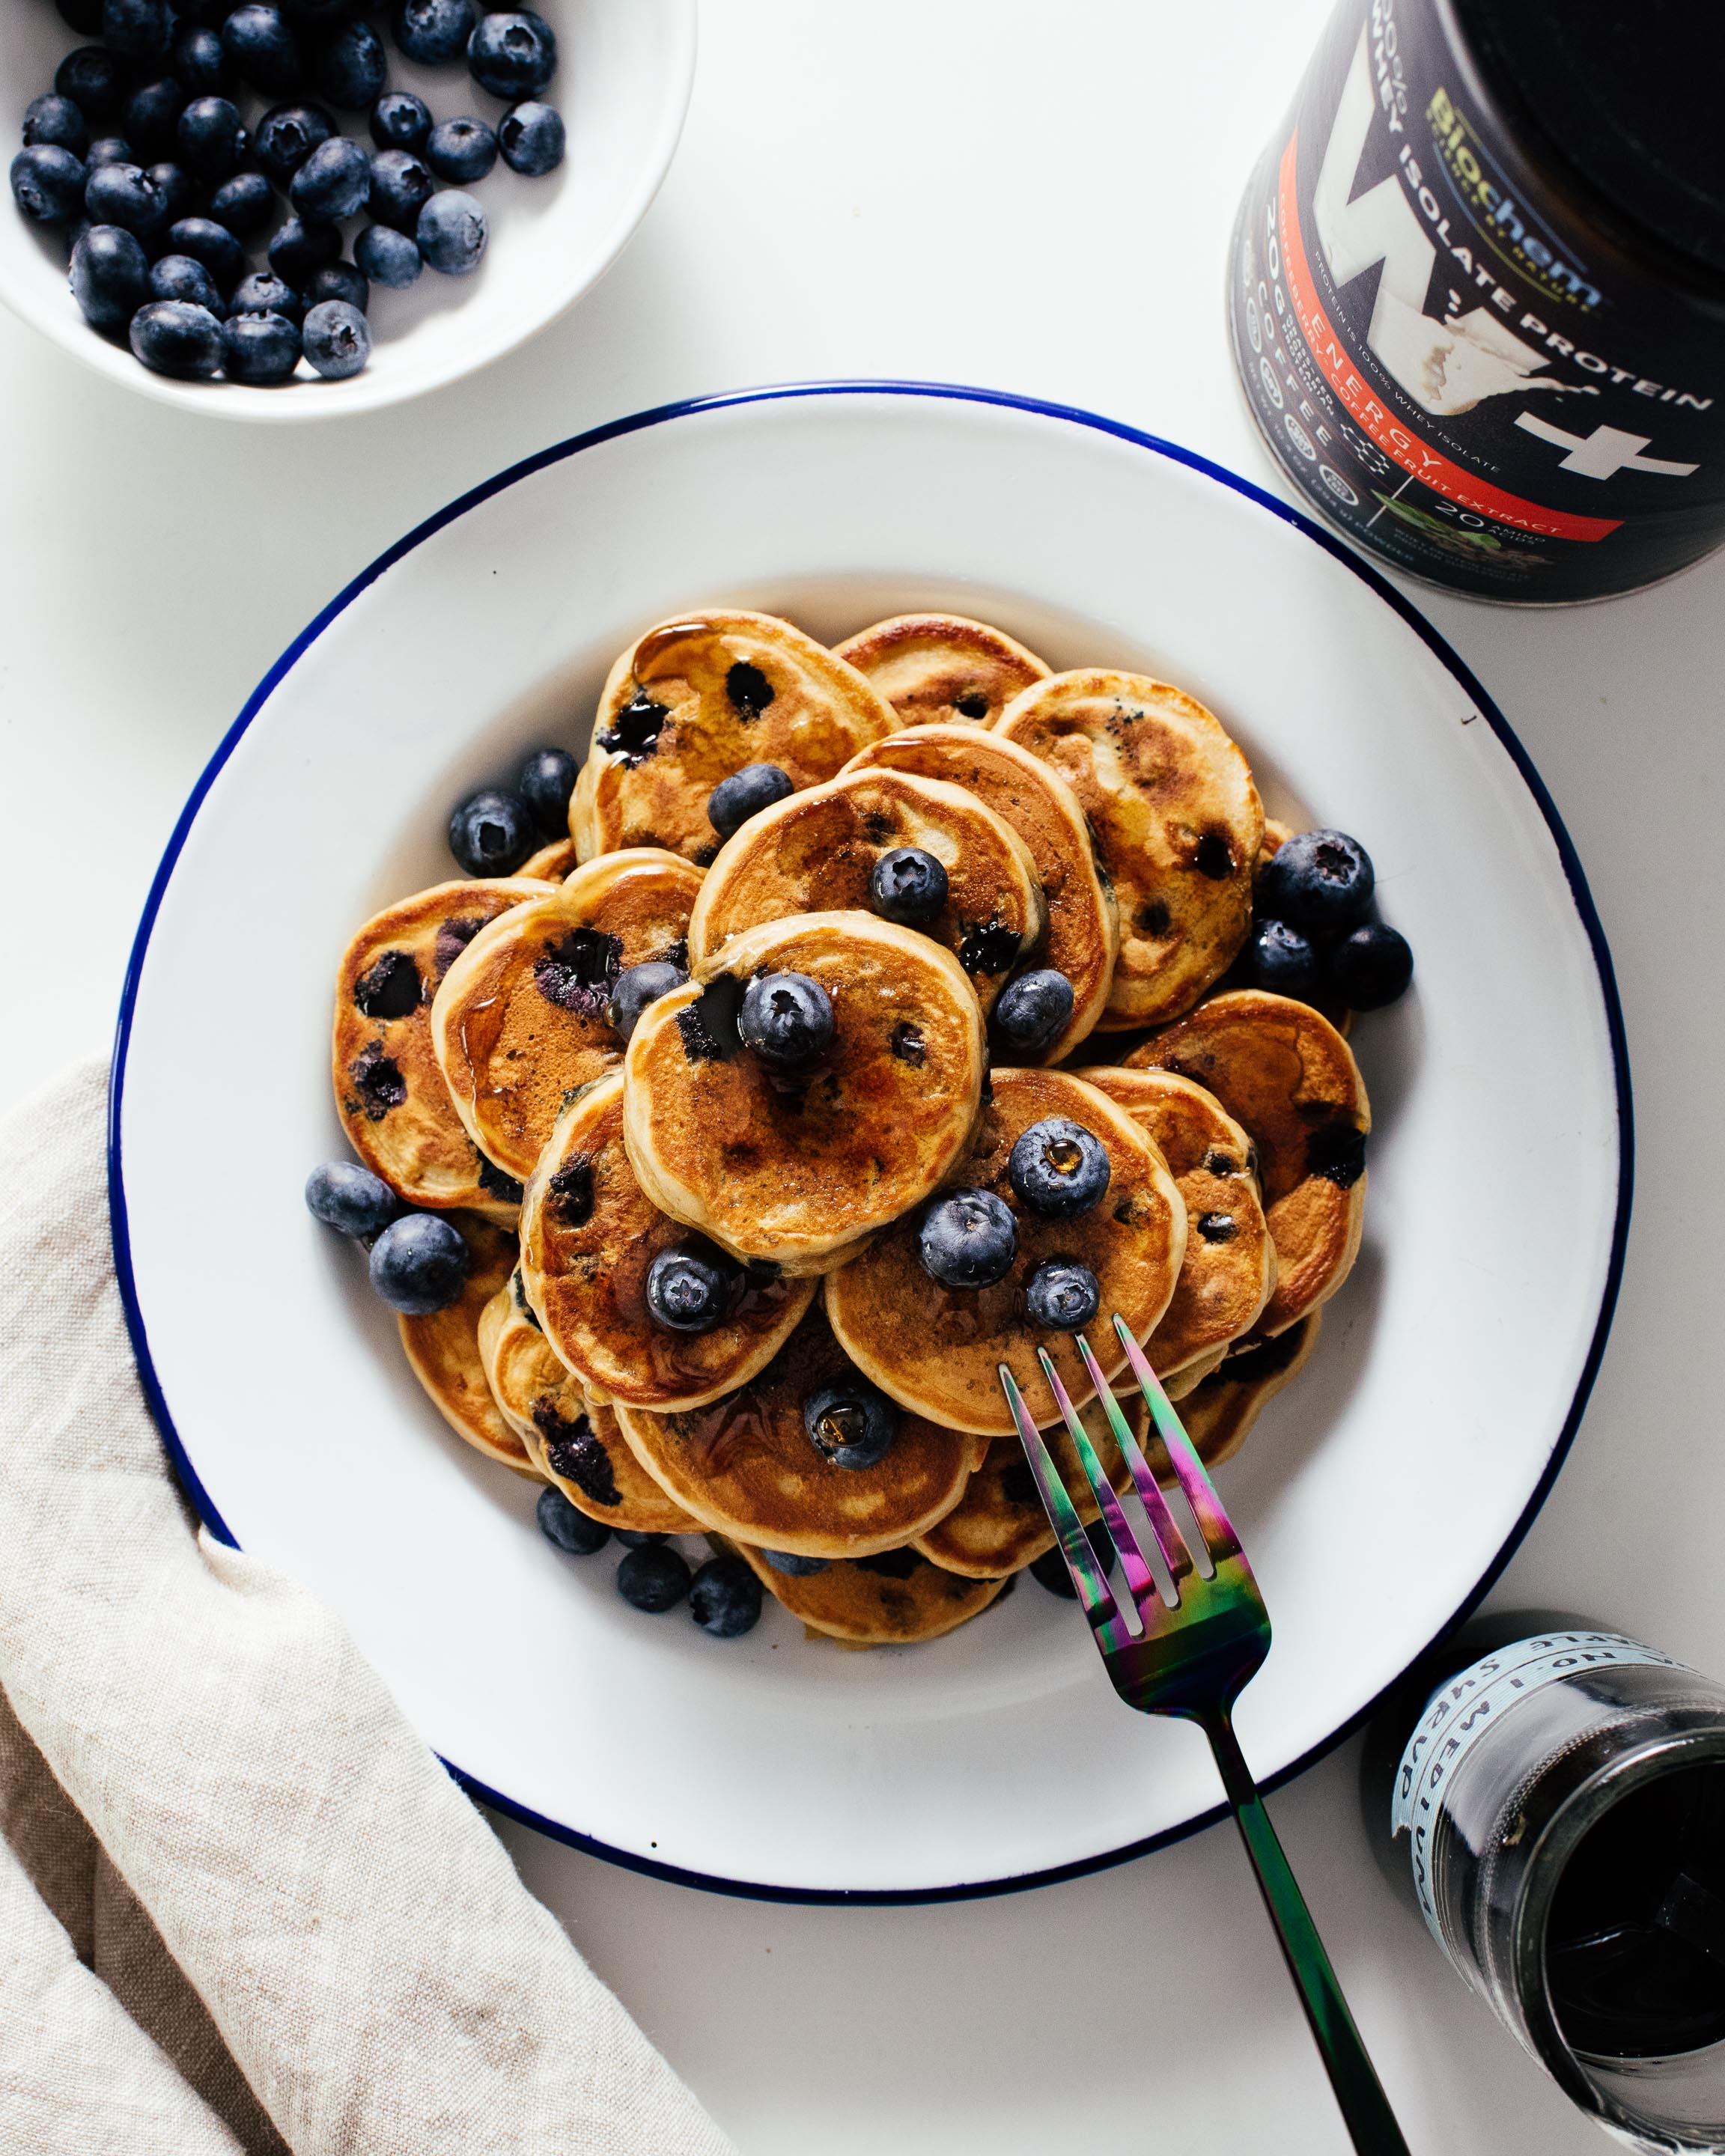 These mini blueberry espresso pancakes are like a superhero for food. They look like an unassuming and delicious breakfast, but they're secretly packed with enough protein and caffeine to boost your energy levels all day long. If you have trouble keeping fresh sausages and bacon in the house, @biochemprotein powders are everything you need for a full and nutritious breakfast, especially when you skip the shakes and include them into yummy pancakes and waffles instead. Recipe on the blog! #sciencebynature #biochemprotein #ad @countrylifevitamins